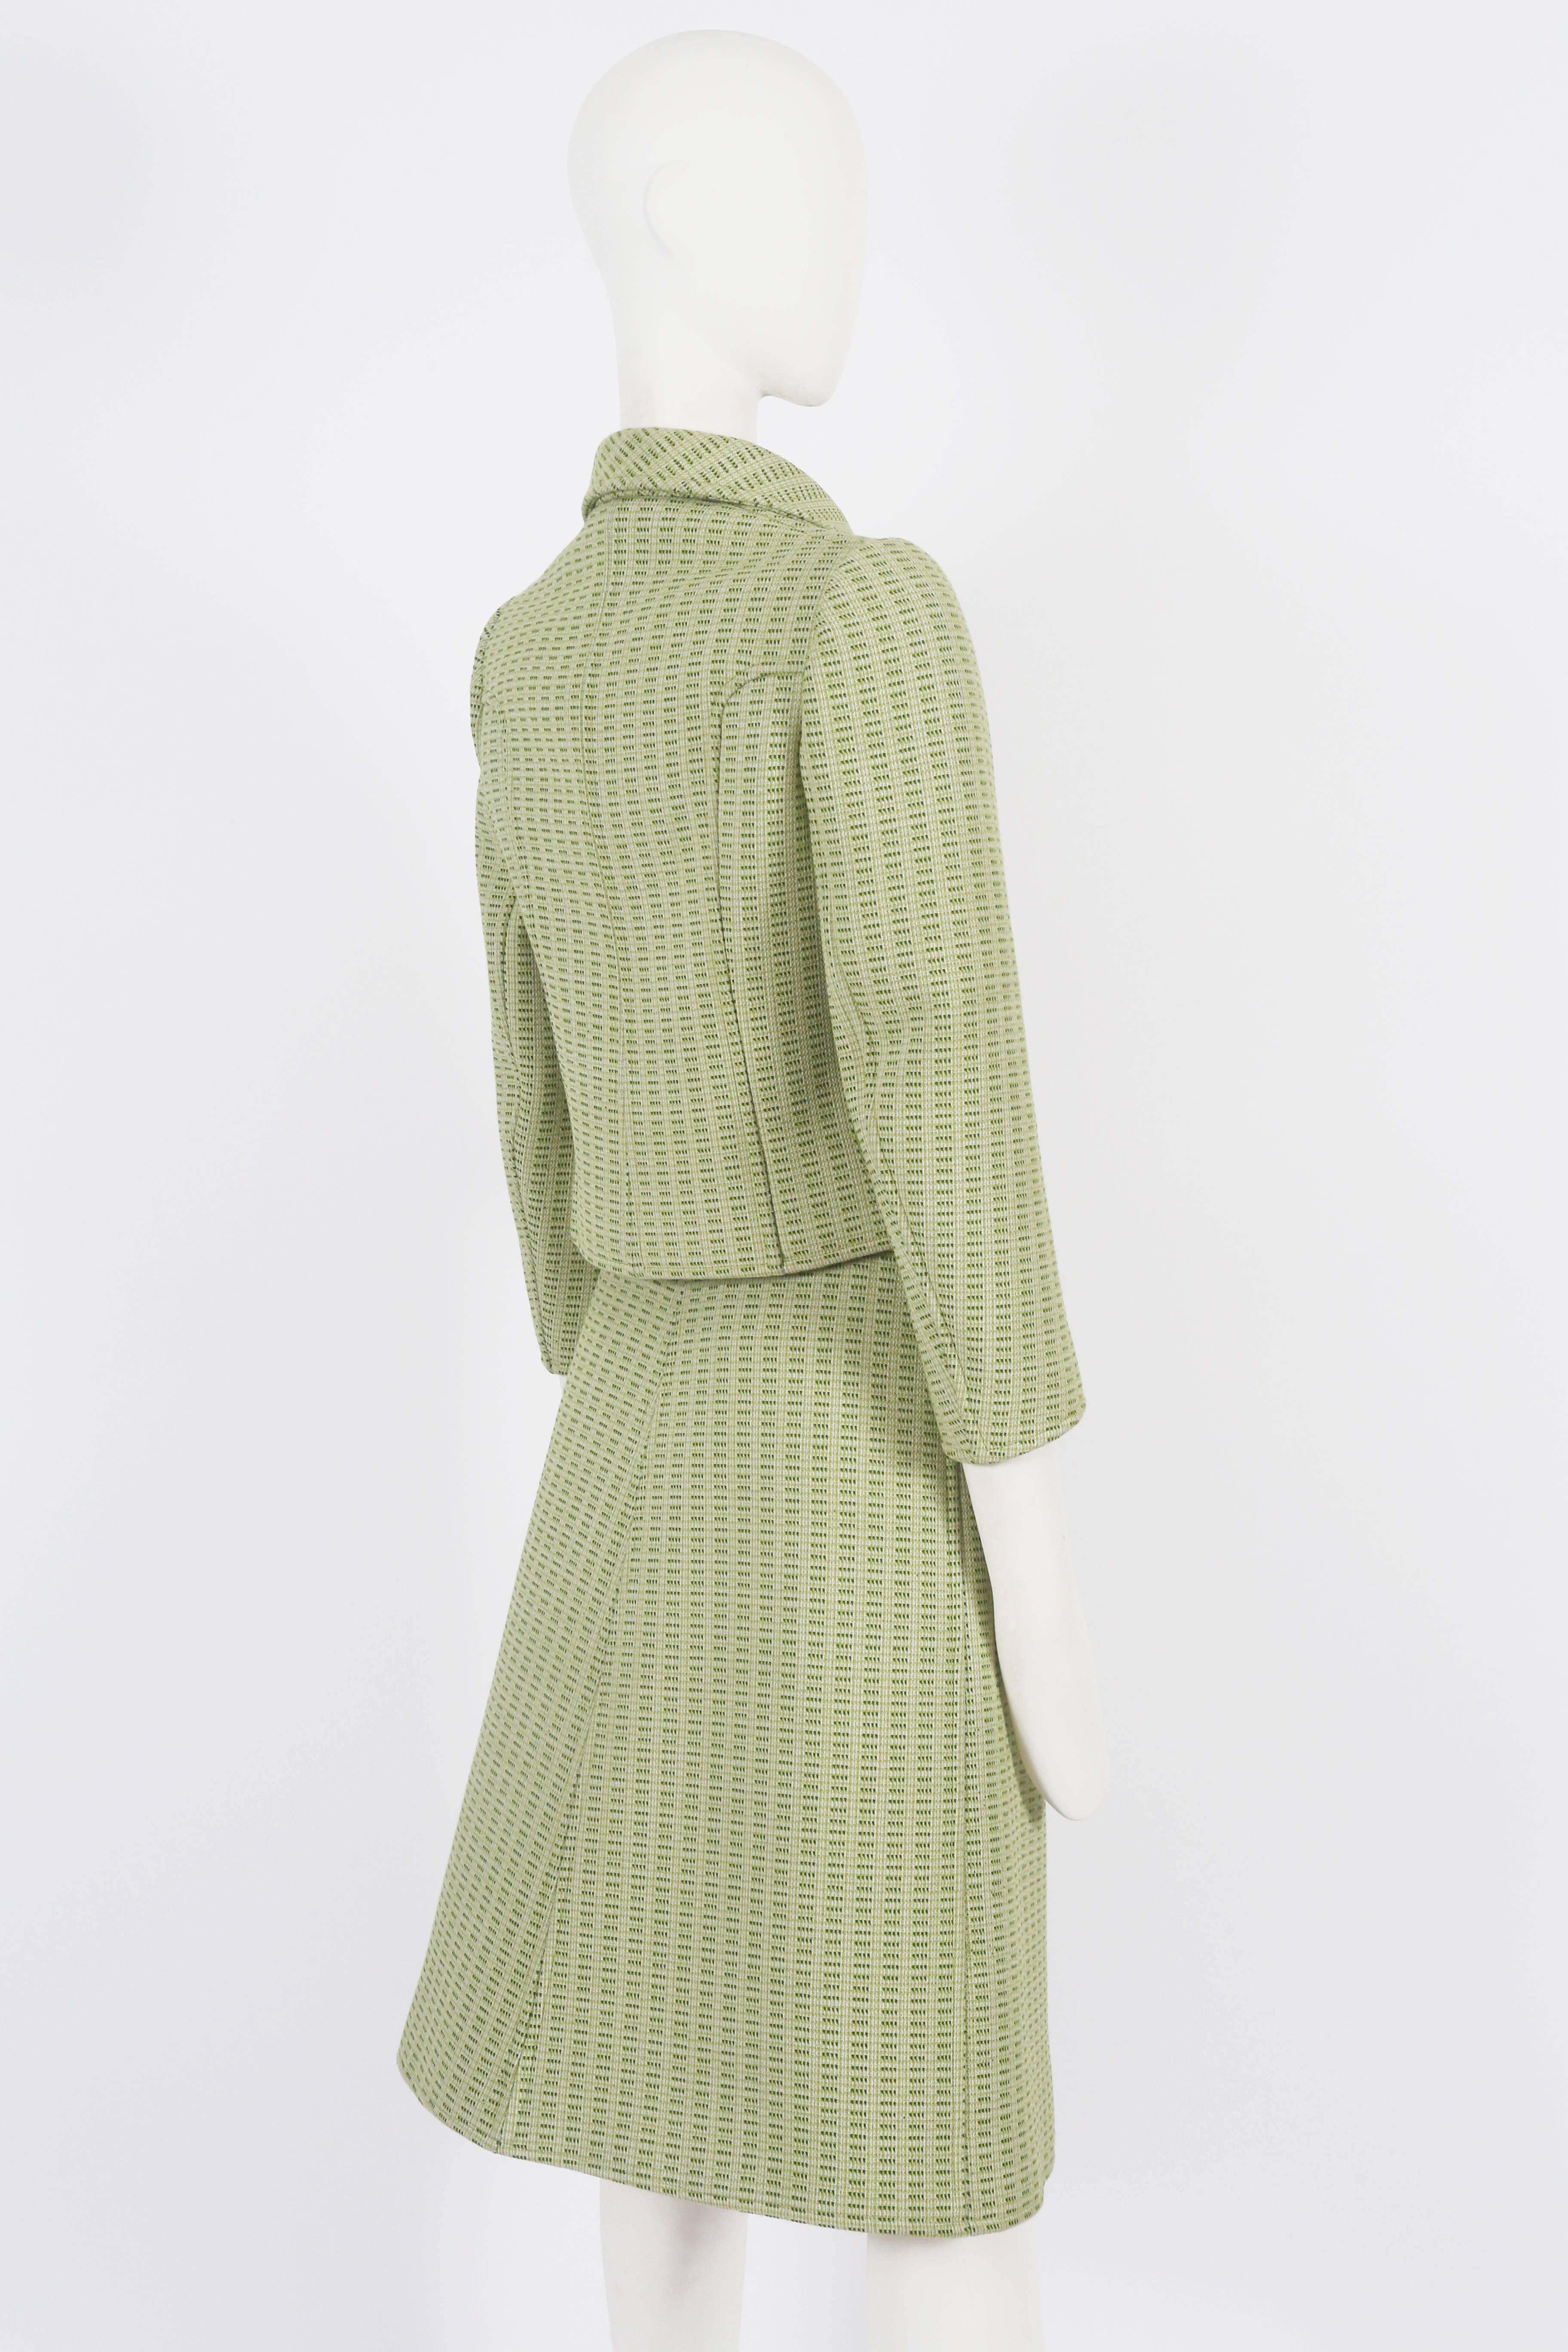 Green Courreges Haute Couture lime green wool jacket and skirt suit, c. 1969 For Sale